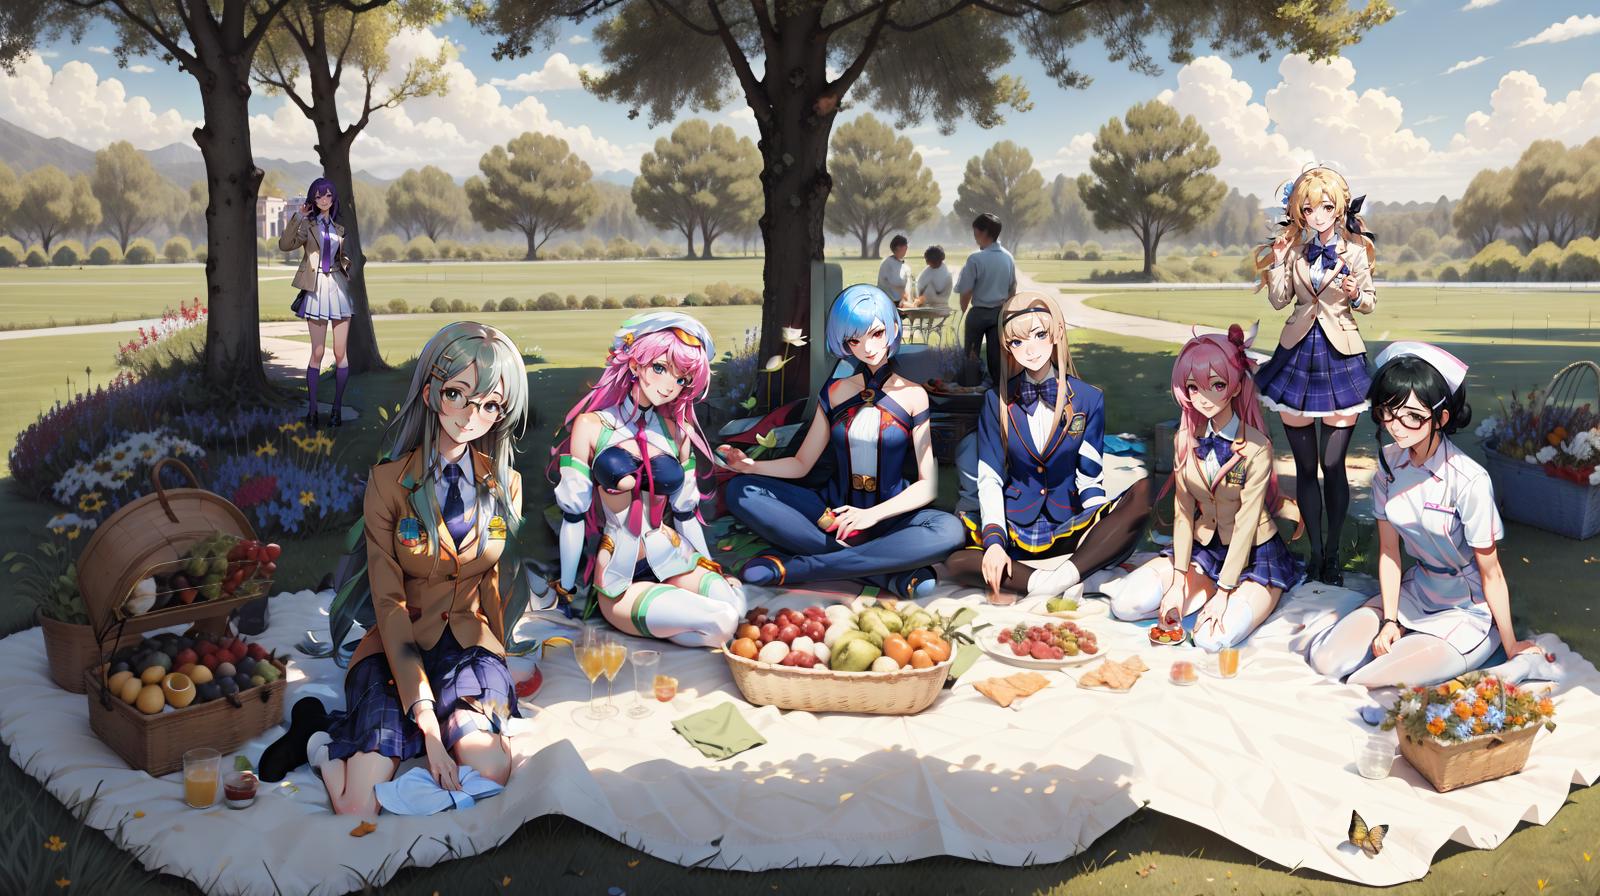 A group of anime characters sitting on a blanket in a park, eating fruit and enjoying each other's company.